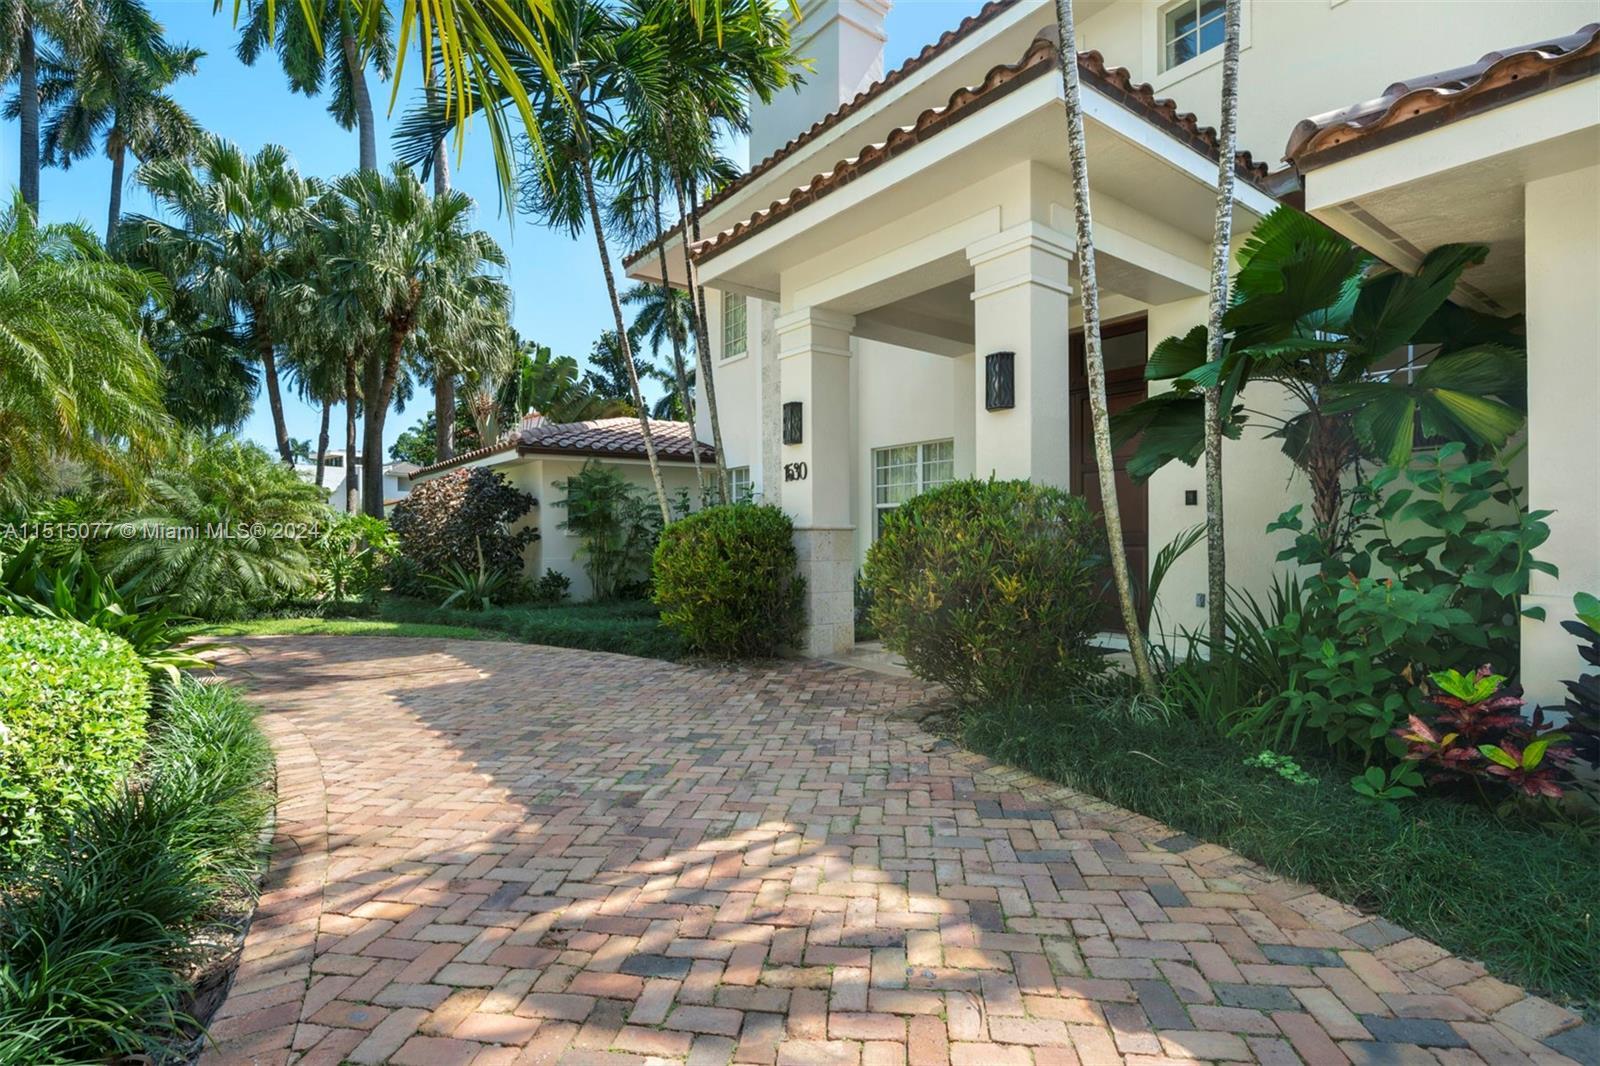 Elegant family home on prestigious Sunset Island II. The home was completely rebuilt in 2003 and has